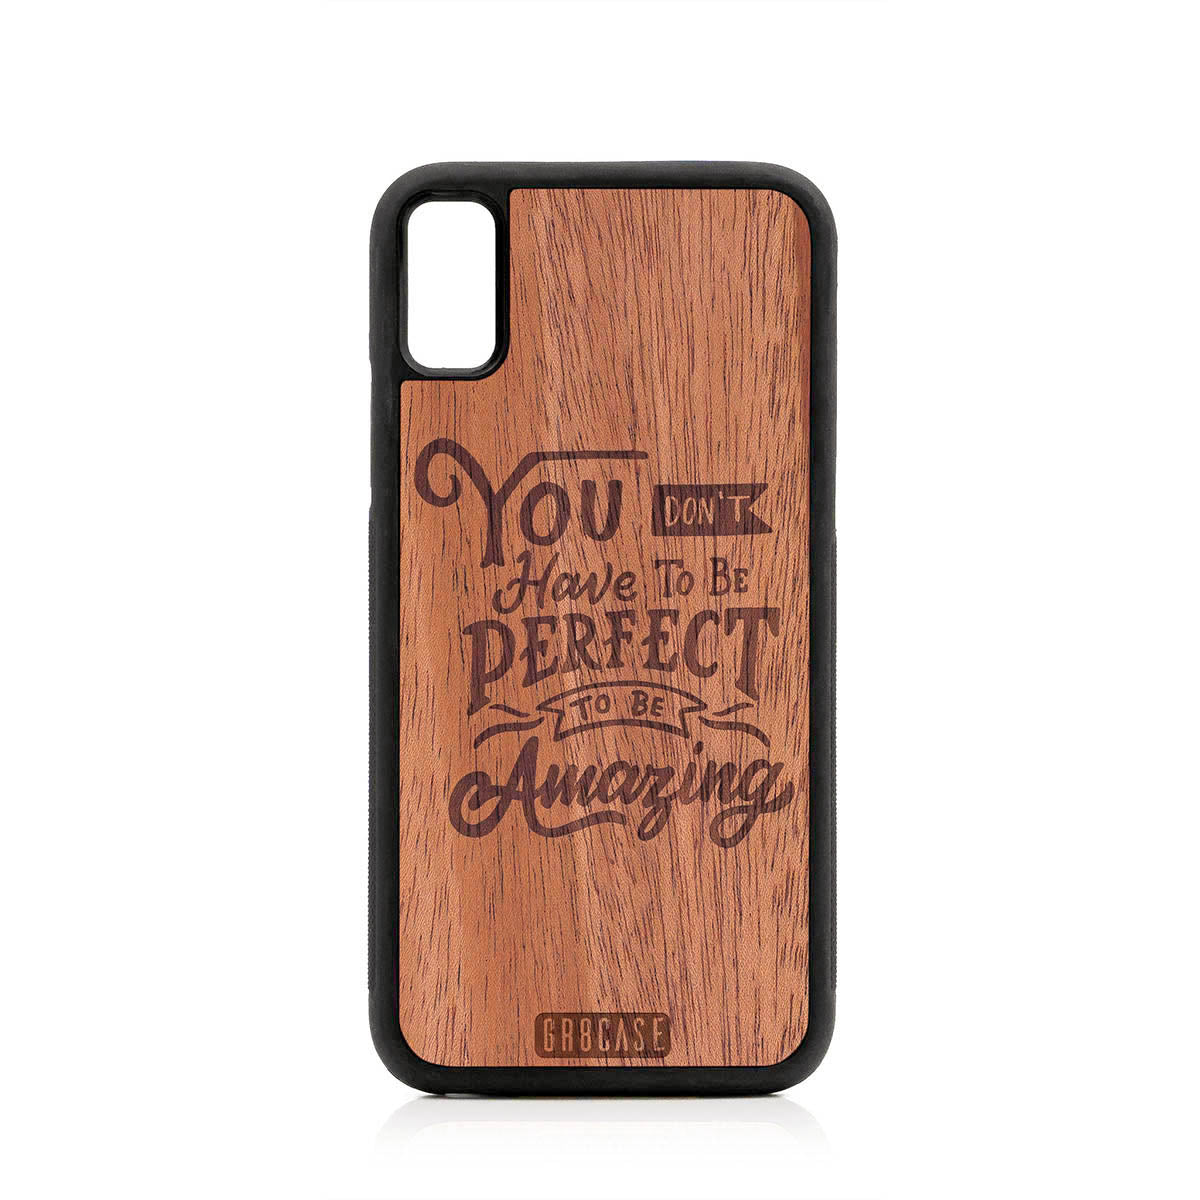 You Don't Have To Be Perfect To Be Amazing Design Wood Case For iPhone XR